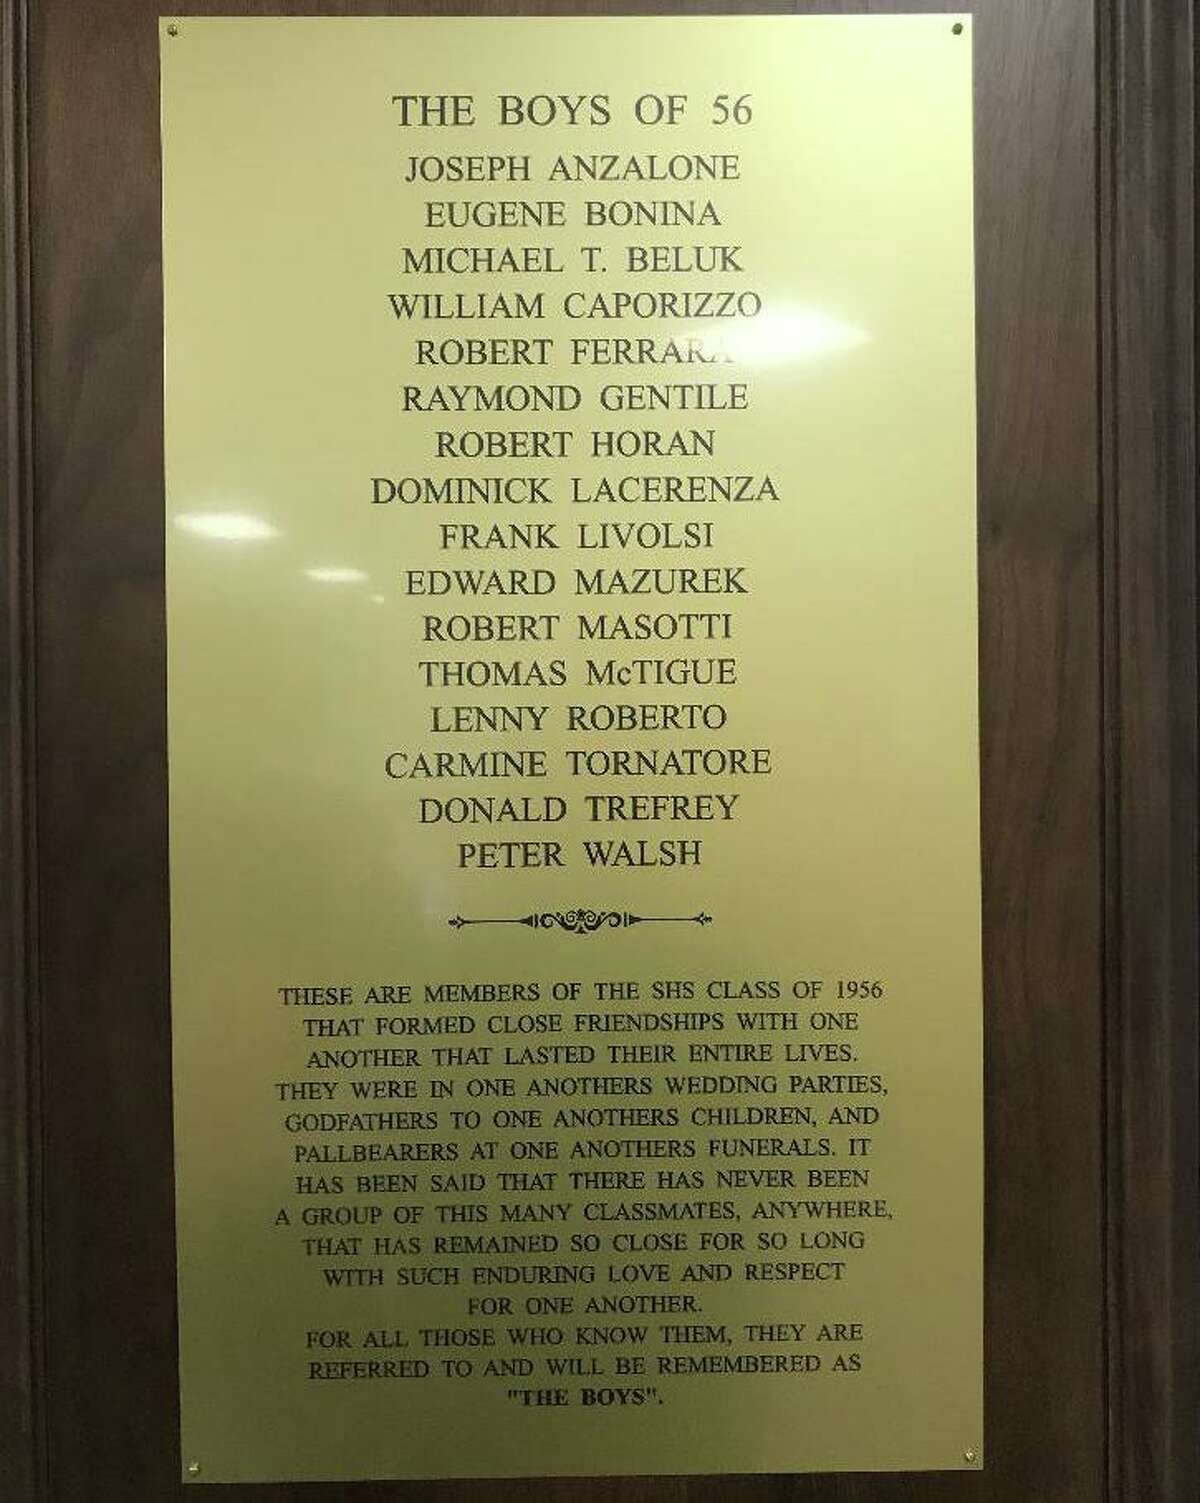 A plaque in the front lobby of Stamford High School.